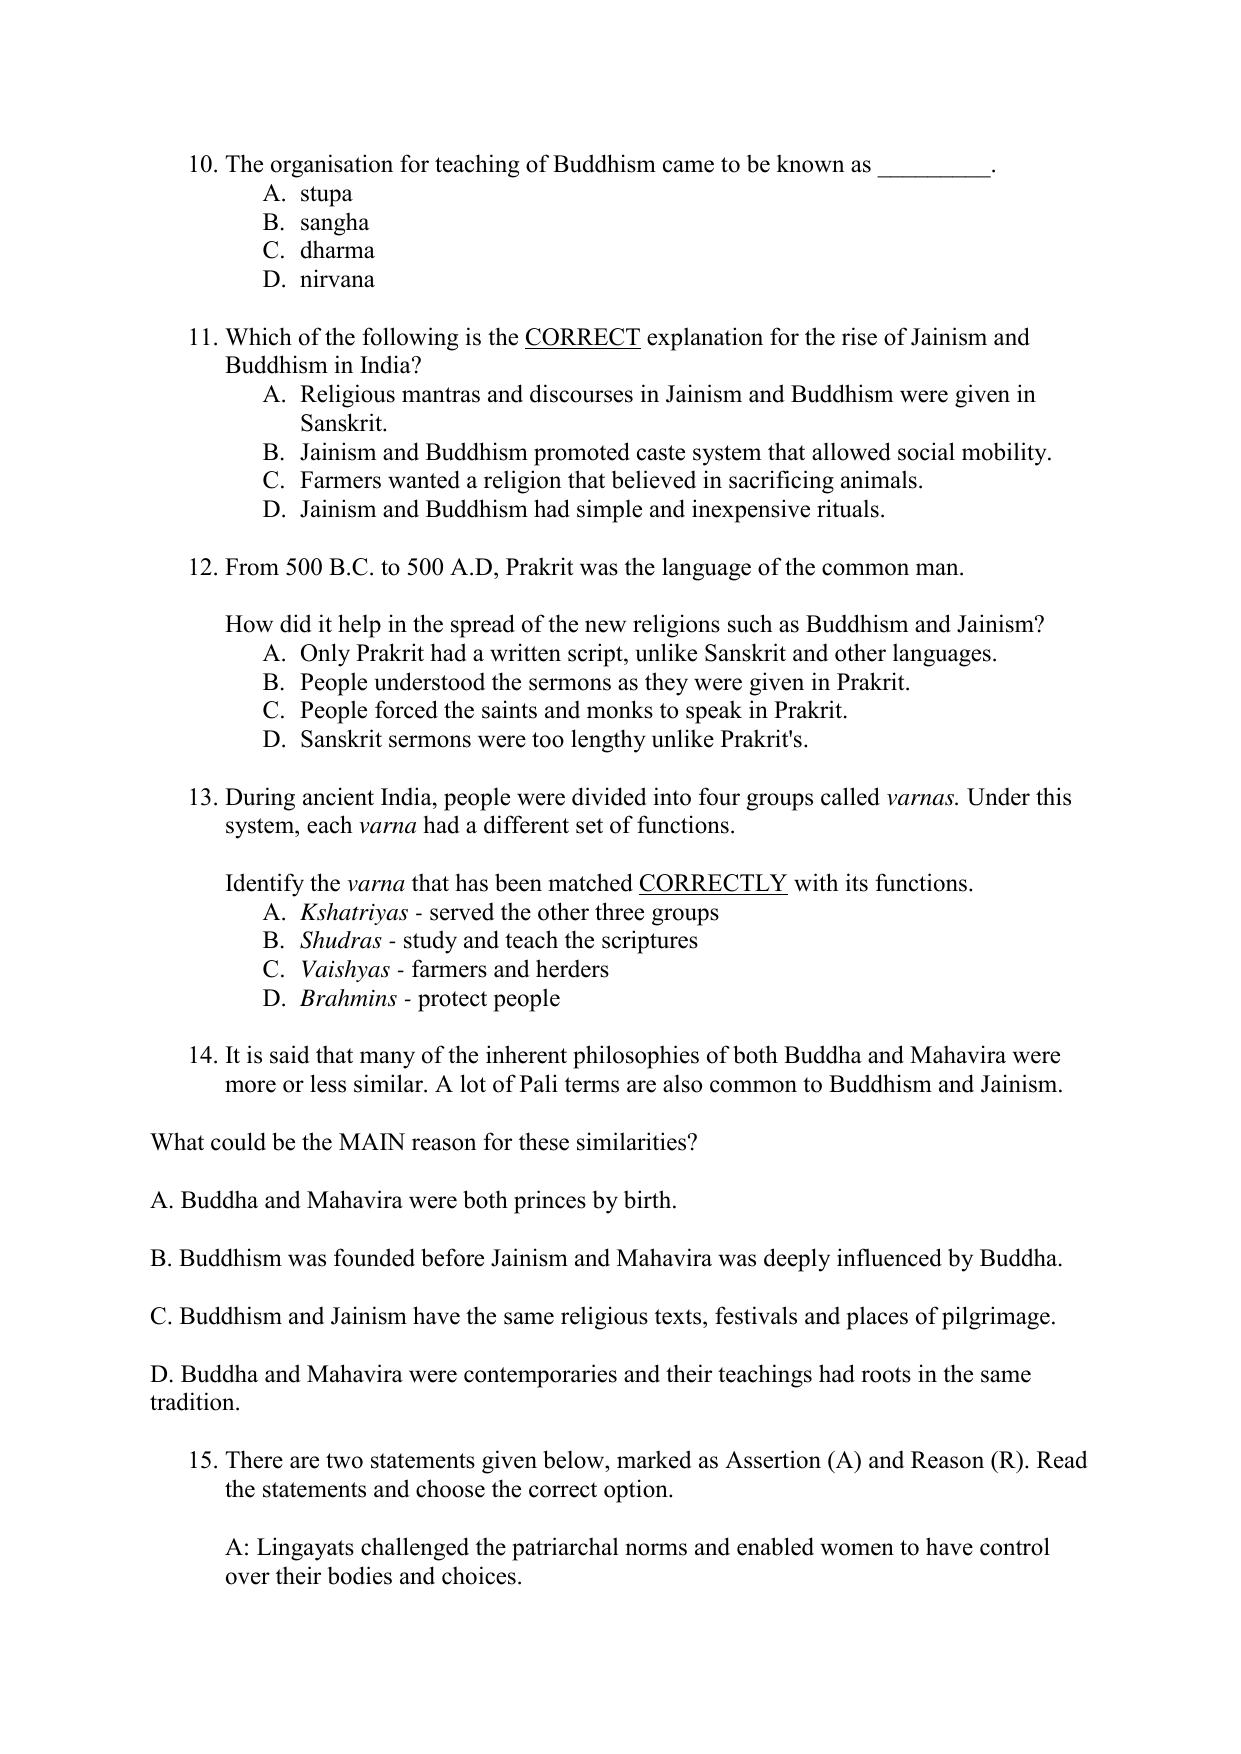 CBSE Class 12 History Term 1 Practice Questions 2021-22 - Page 3